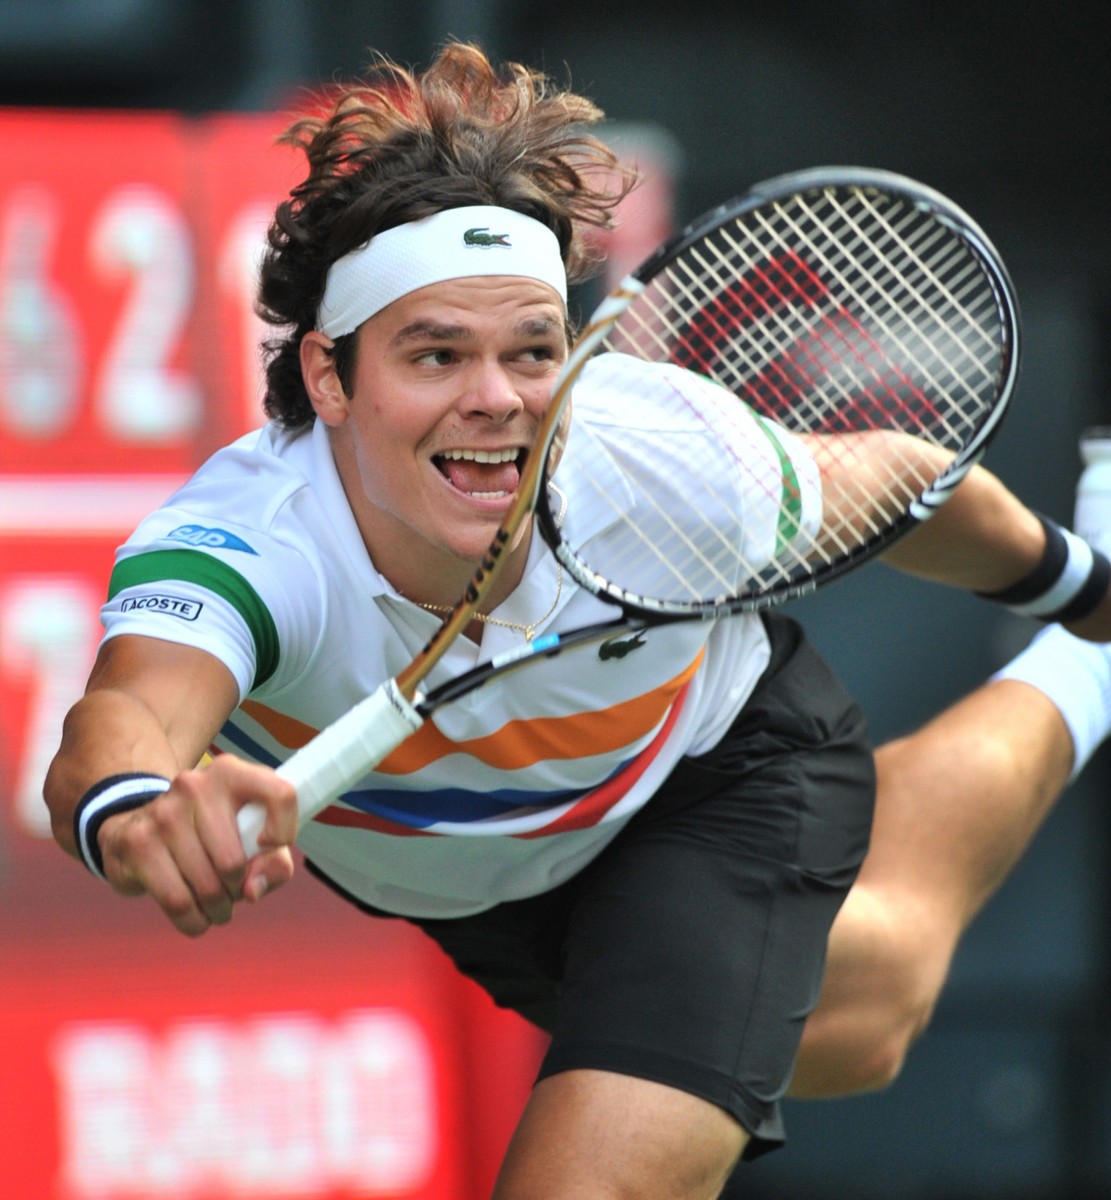 Canada's Milos Raonic returns a shot in the Japan Open tennis final on Sunday. He reached a career-high ranking of No. 13 in the world by reaching the final. (Kazuhiro Nogi/AFP/GettyImages)